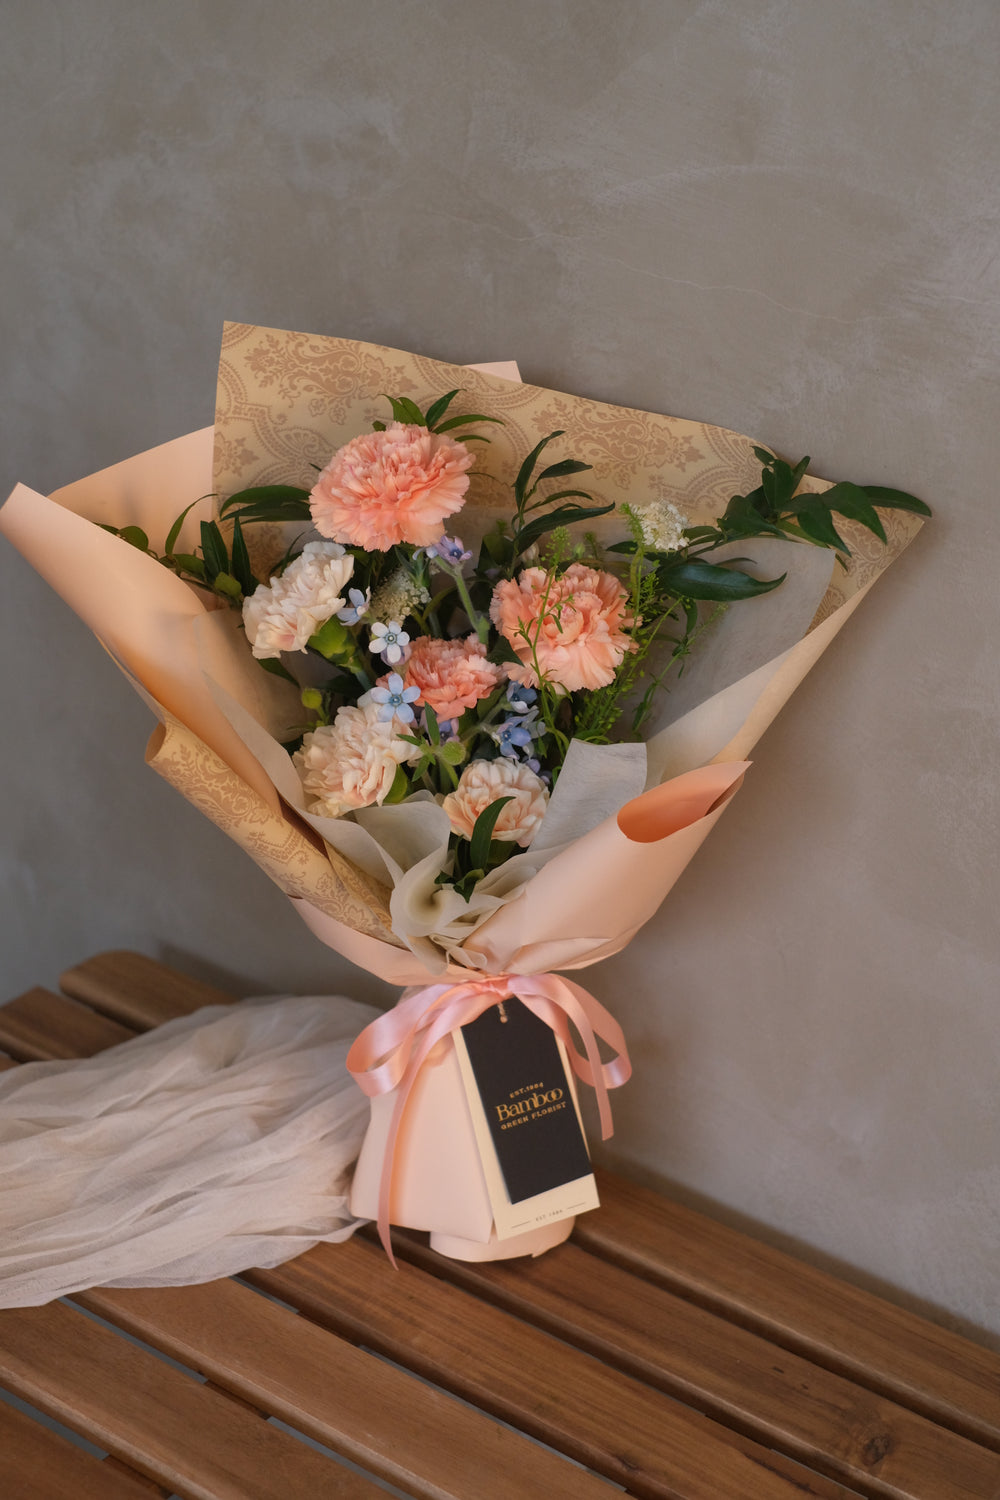 An elegant bouquet of assorted flowers, including carnations, roses, and lilies, arranged in a vase. The vibrant colors and delicate blooms convey love, gratitude, and appreciation for mothers and mother figures."